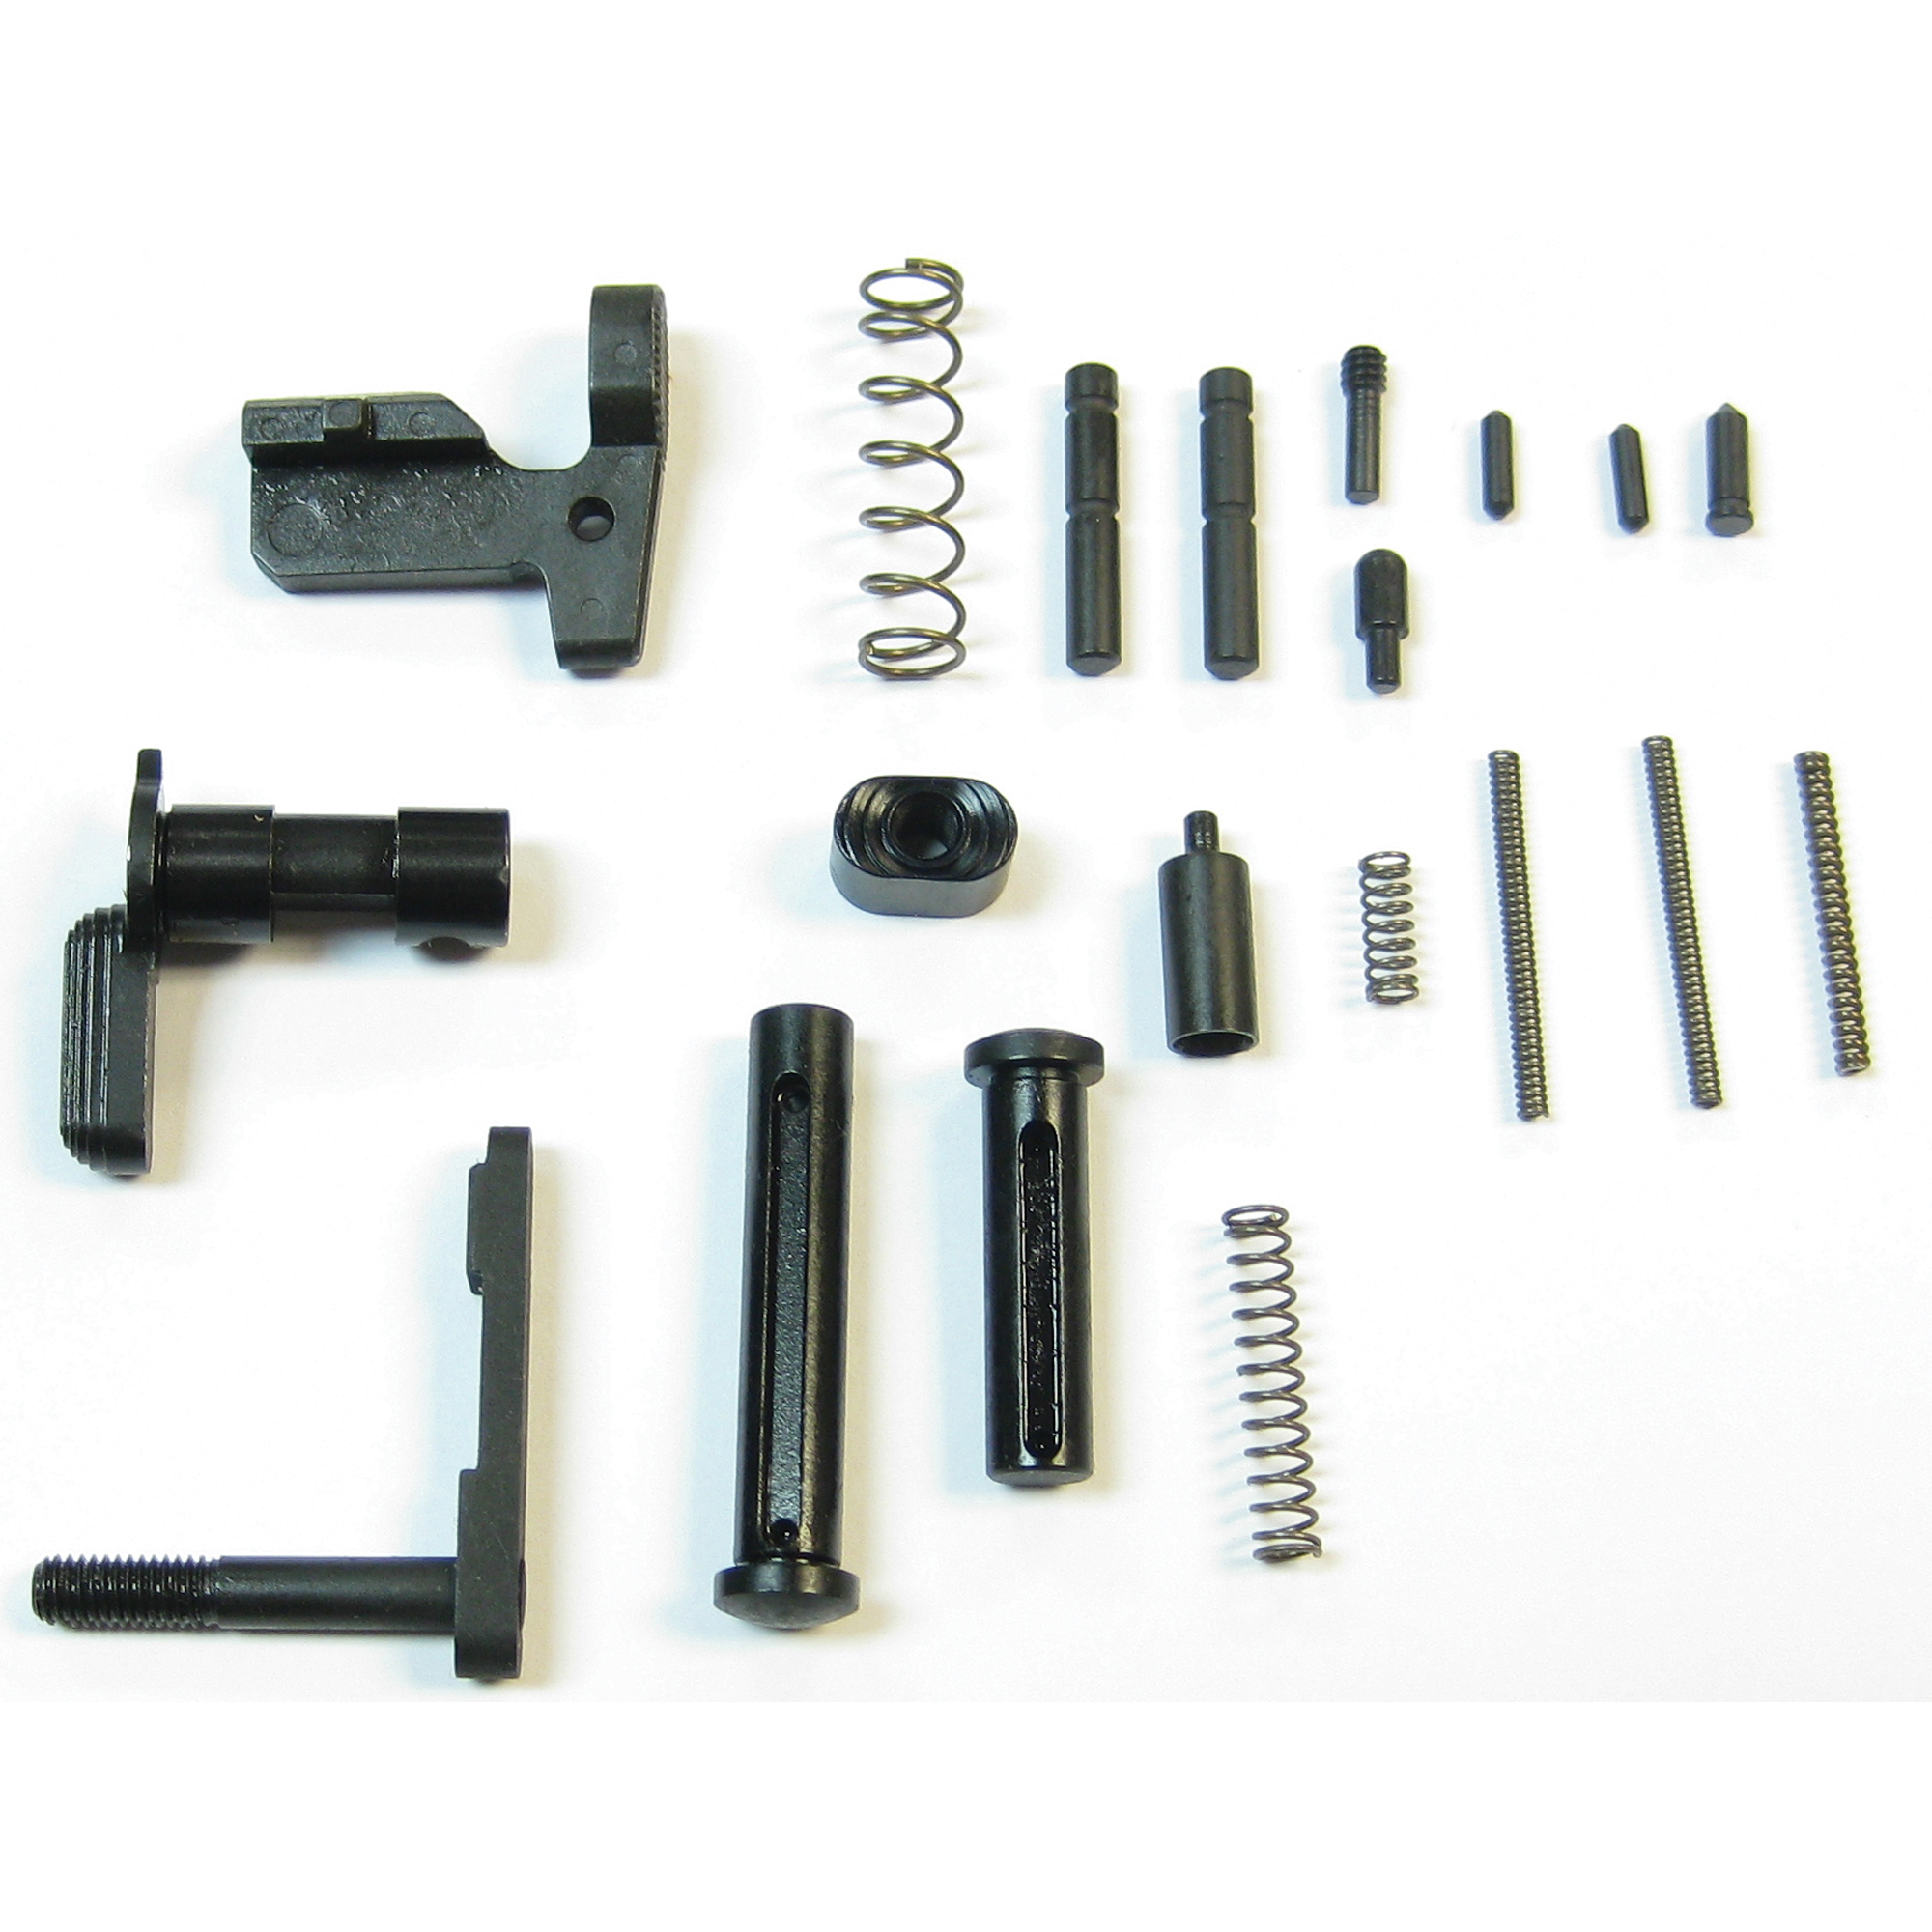 CMMG 308 LOWER PARTS KIT